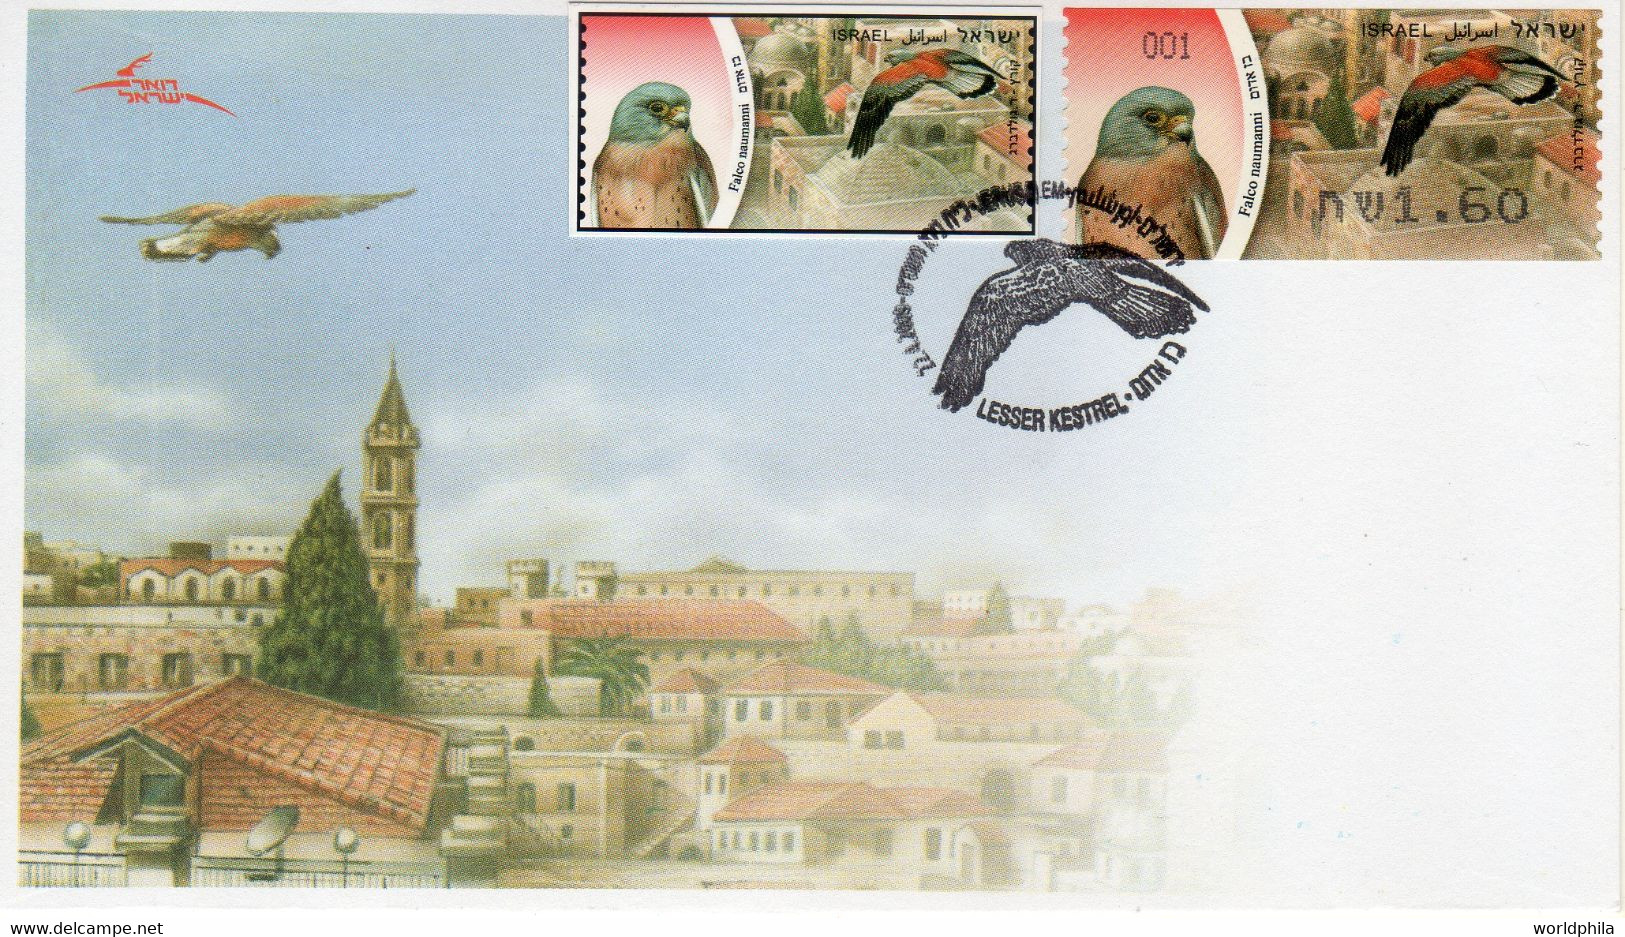 Israel 2009 Extremely Rare Falco Hanmahni Bird, ATM Stamp, Designer Photo Proof, Essay+regular FDC 9 - Imperforates, Proofs & Errors